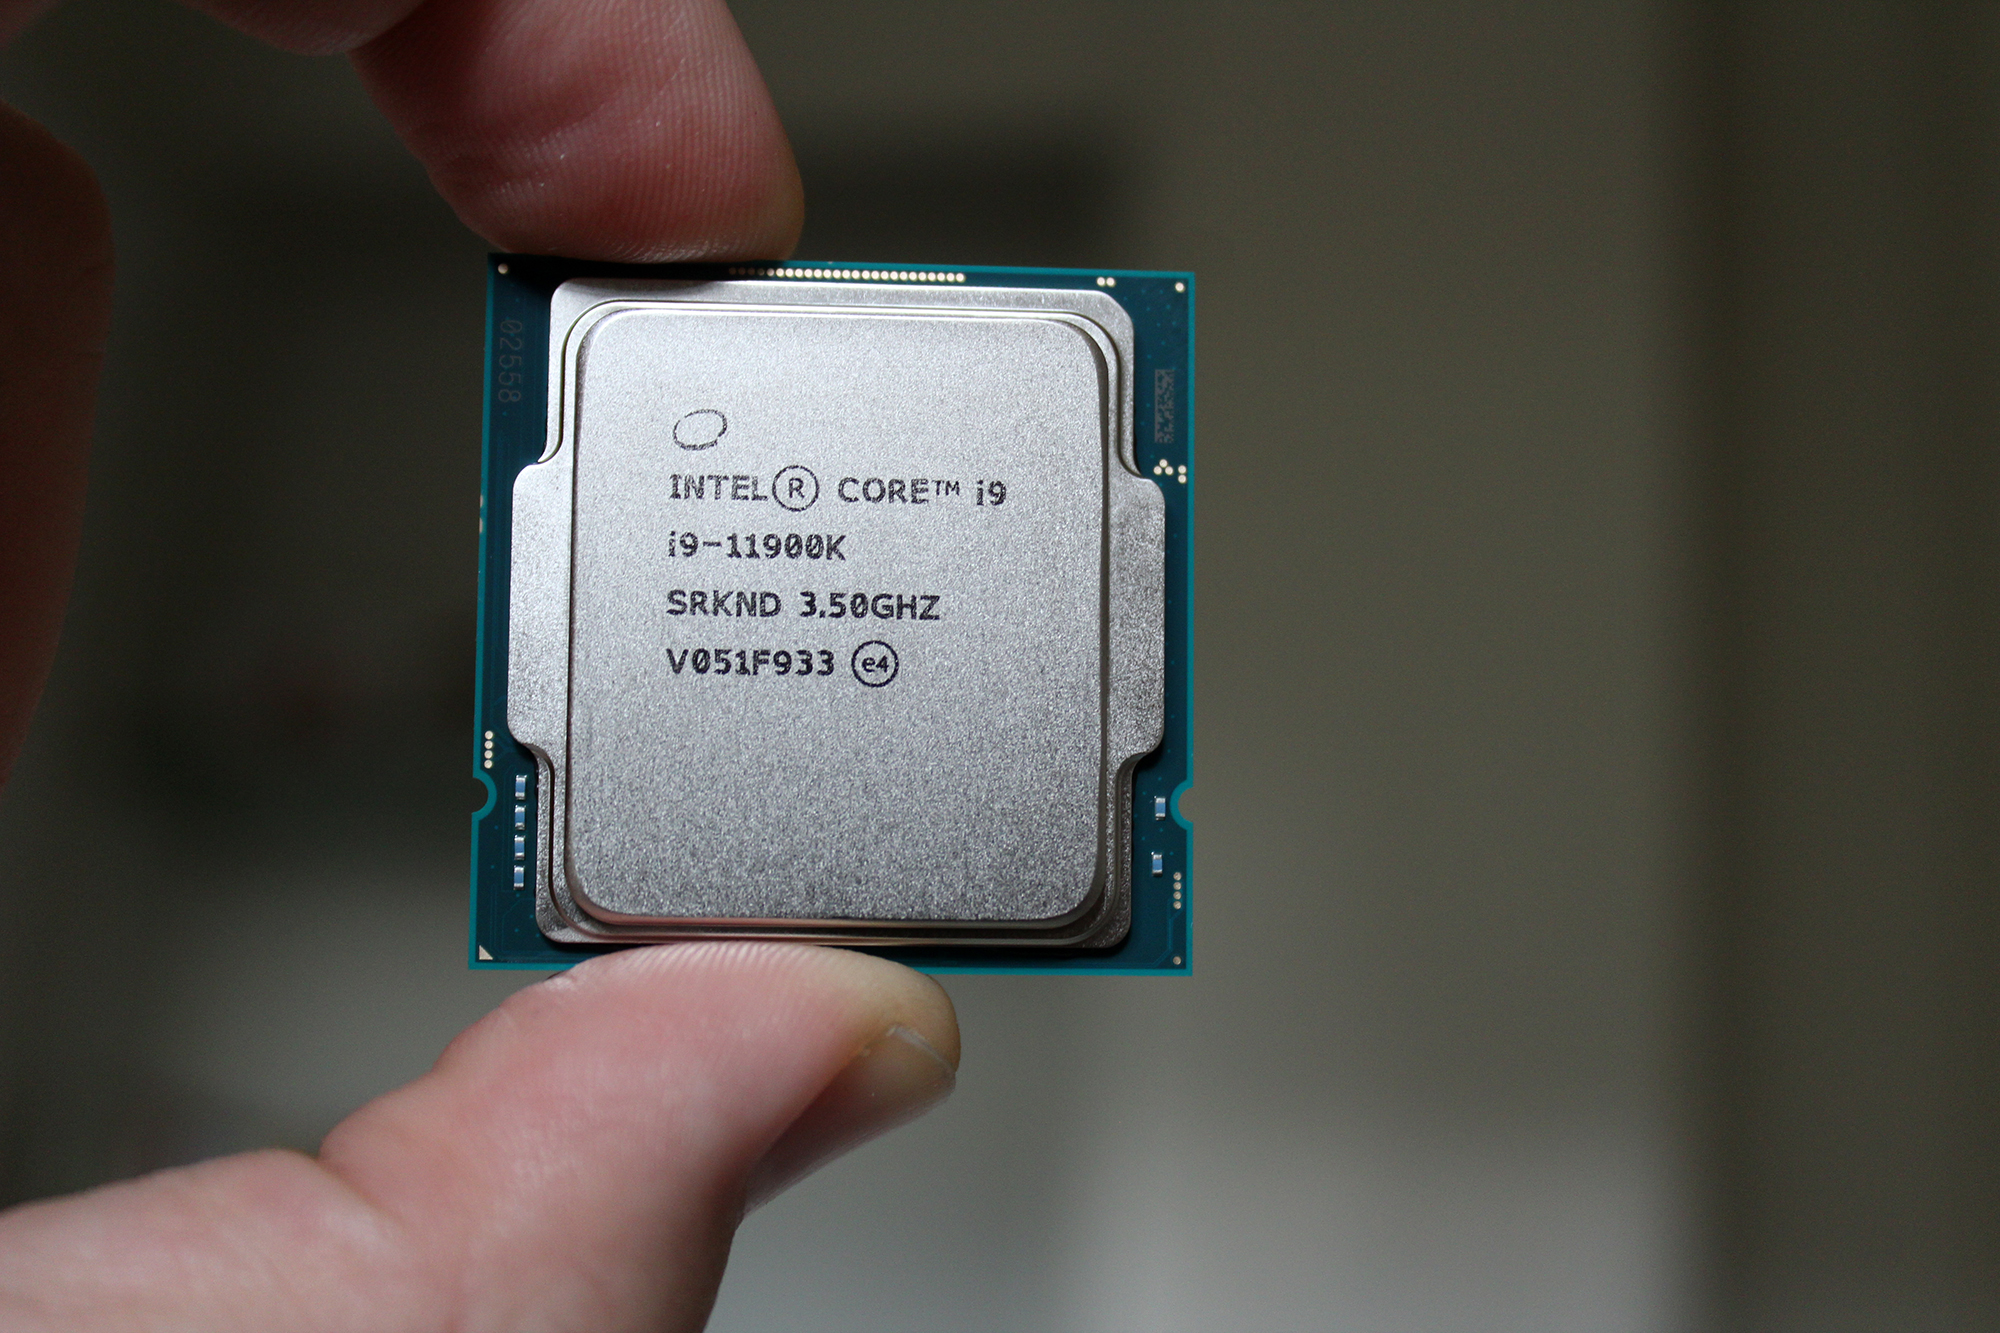 Intel launches powerful Core-X series processors at drastically